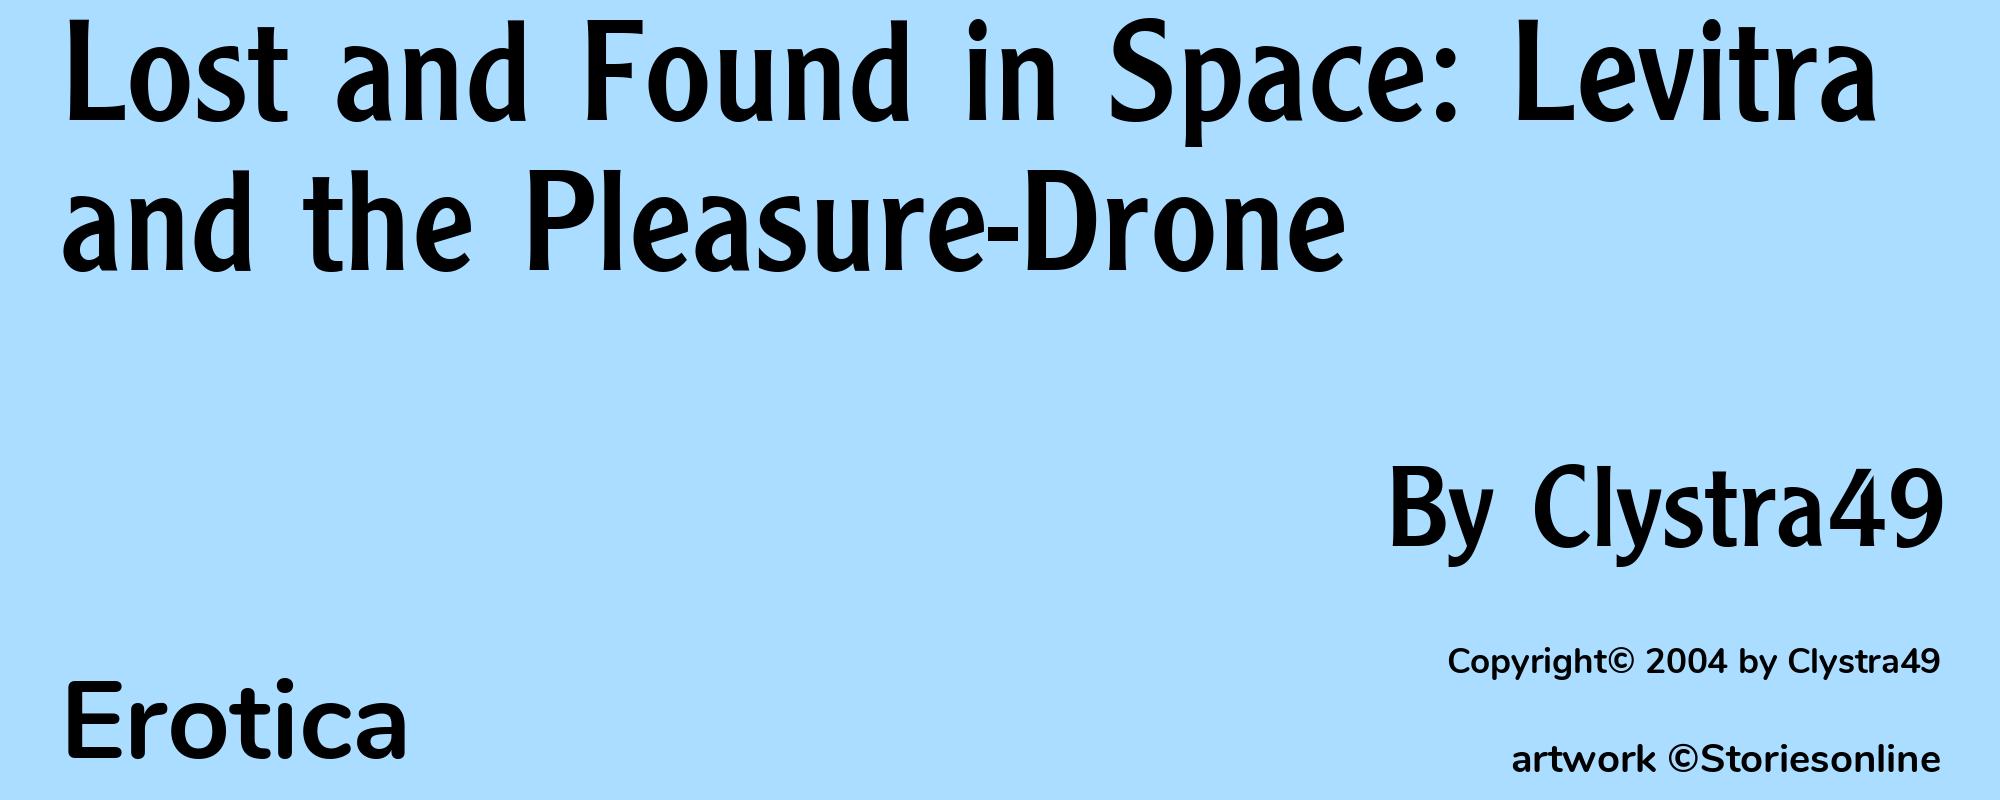 Lost and Found in Space: Levitra and the Pleasure-Drone - Cover